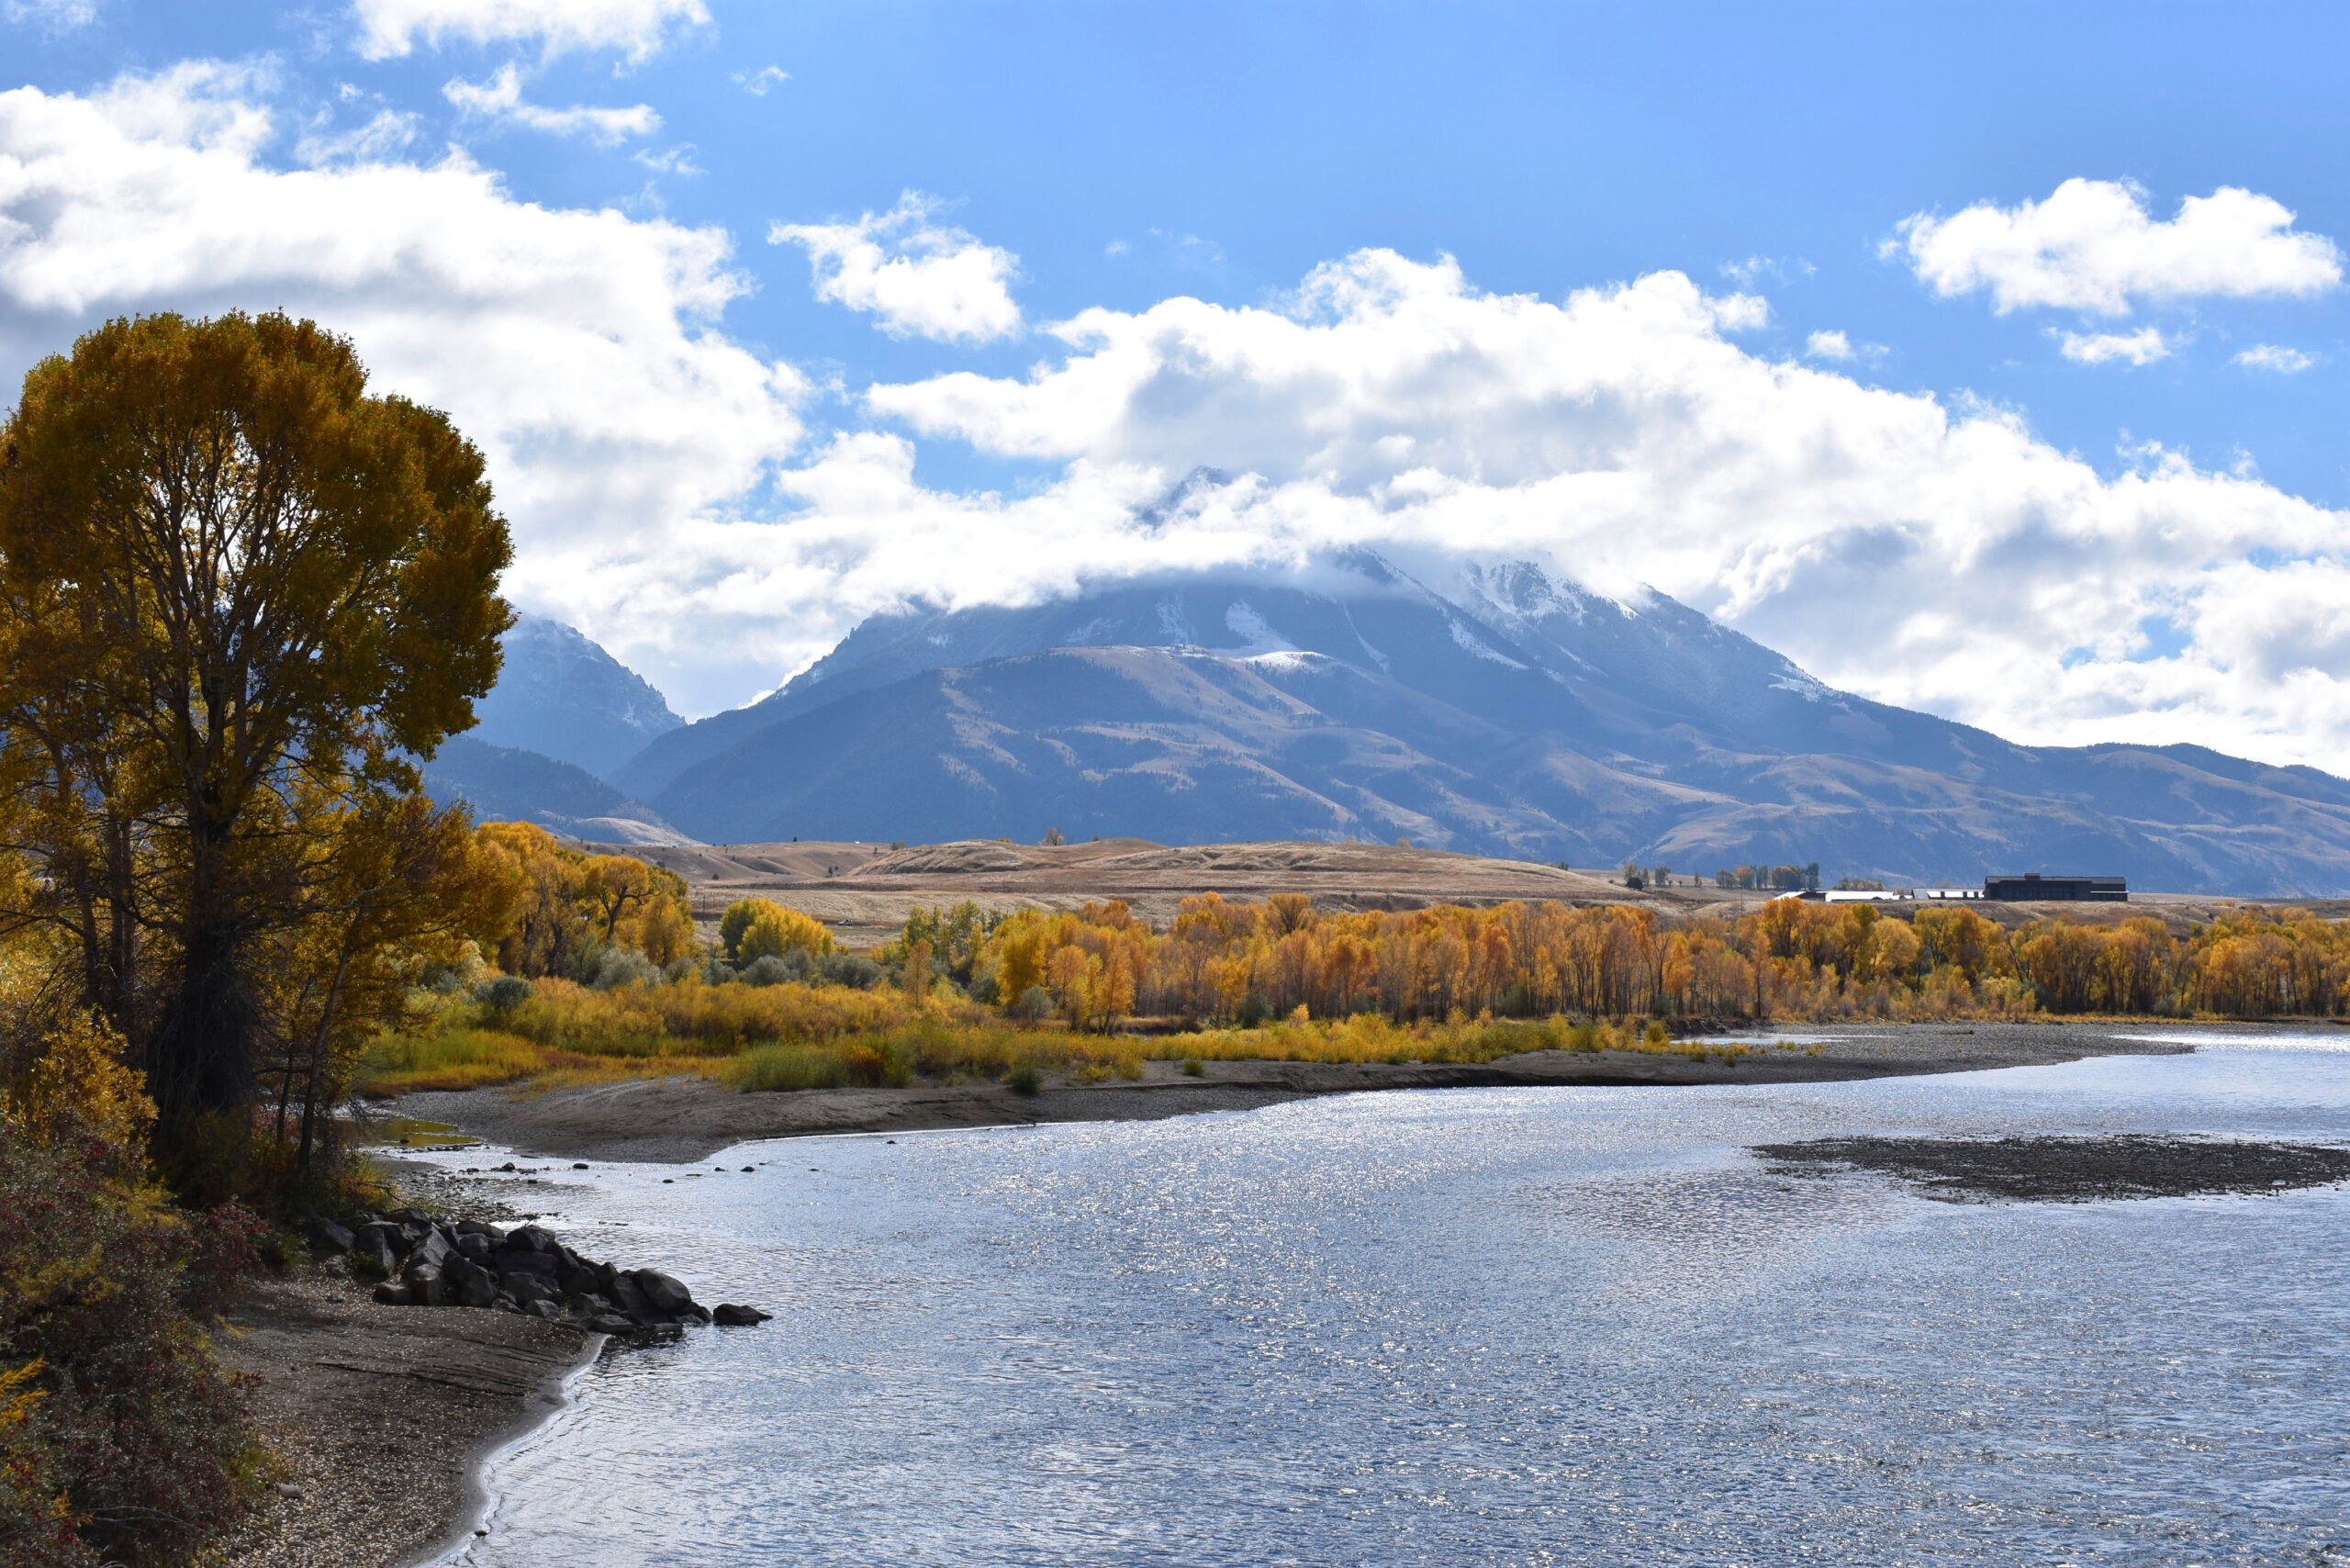 Emigrant Peak rises above the Paradise Valley and the Yellowstone River.